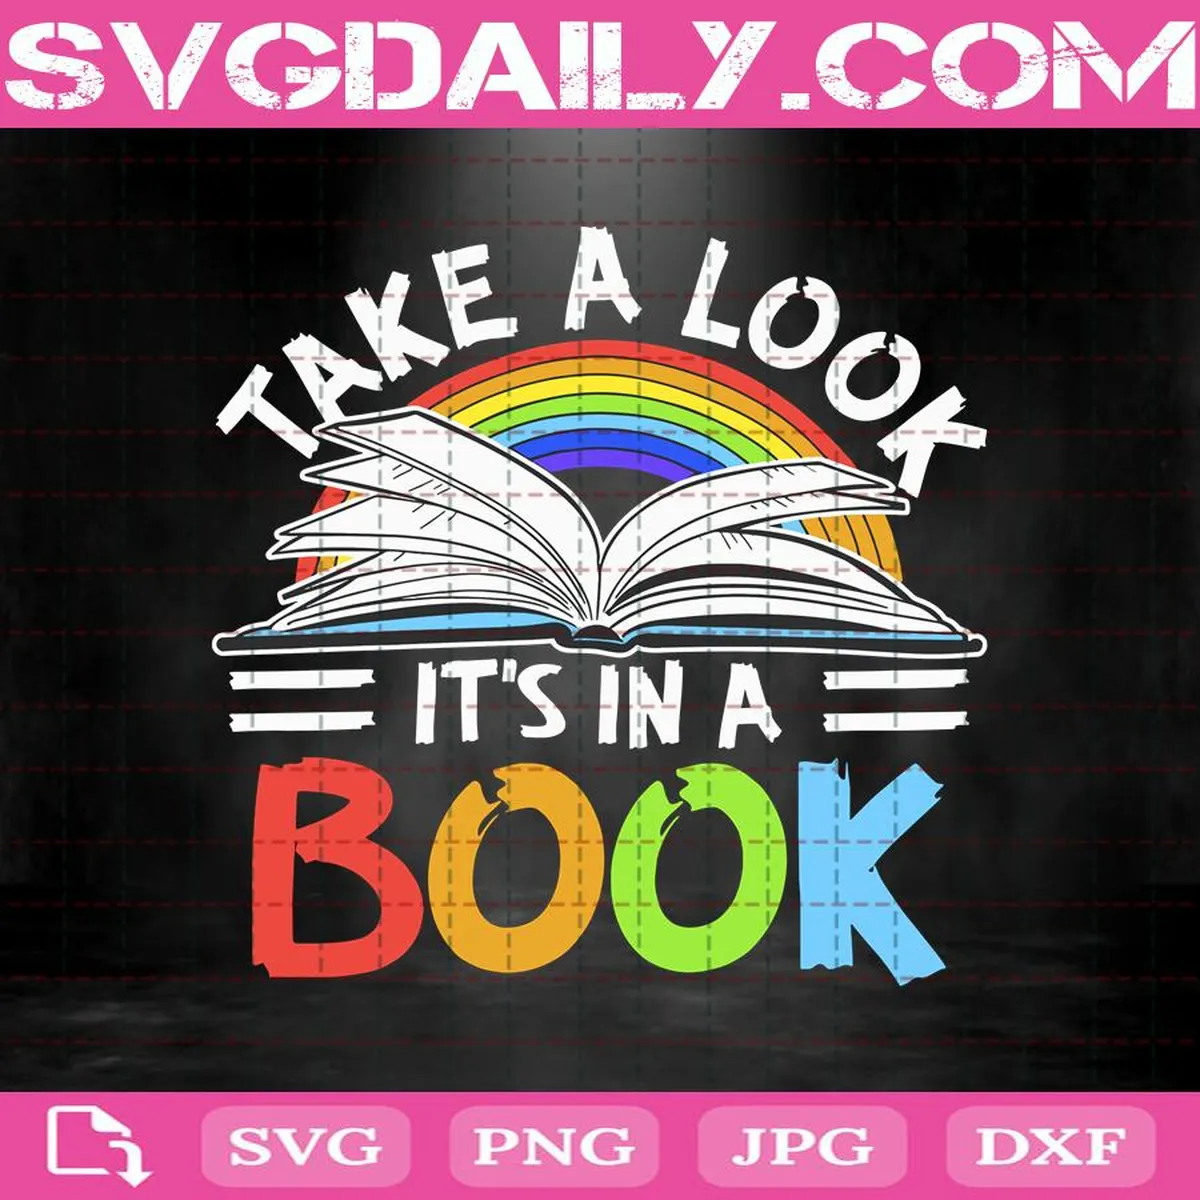 Take A Look It's In A Book Svg, Love Reading Svg, Love Rainbows Svg, Rainbow Svg, Book Svg, Read Book Svg, Svg Png Dxf Eps AI Instant Download